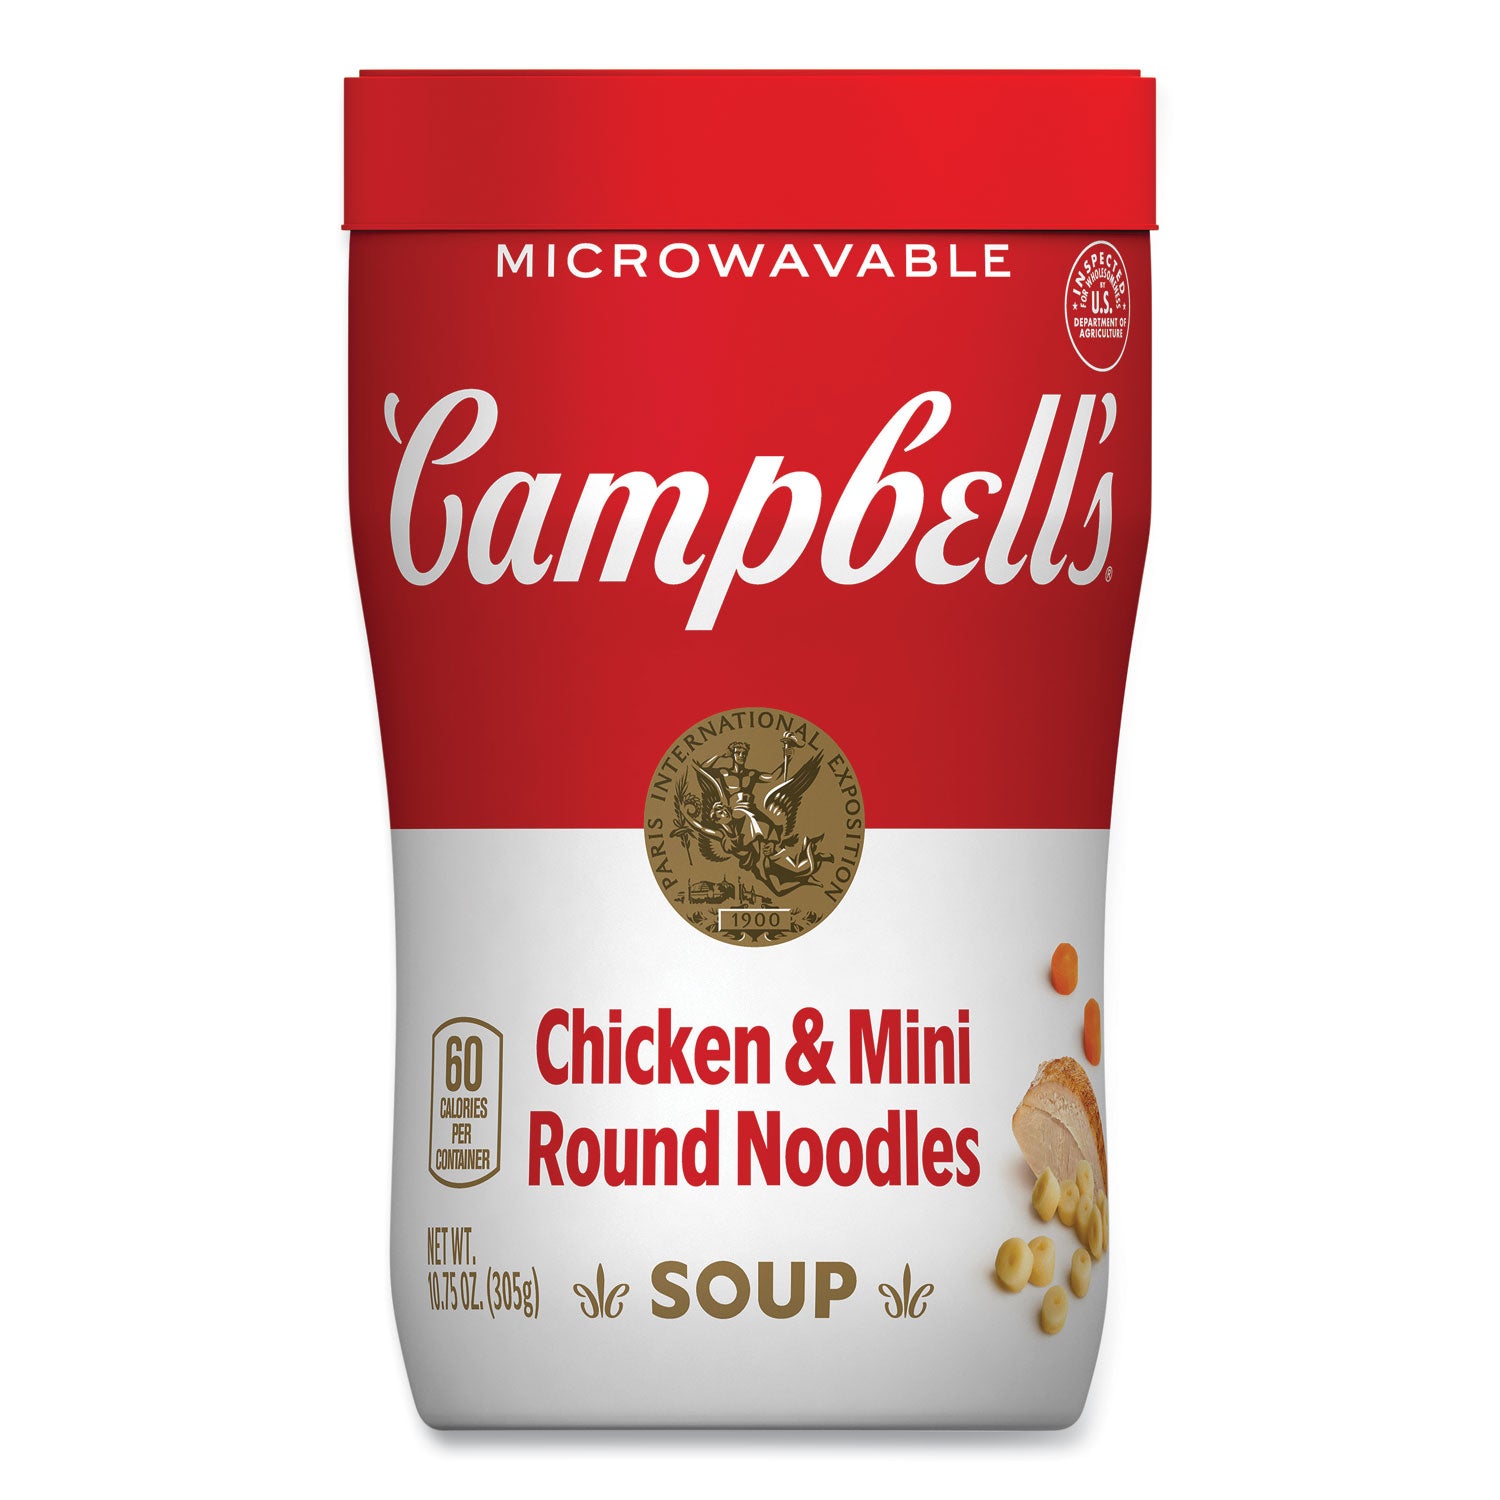 soup-on-the-go-chicken-with-mini-noodles-1075-oz-cup-8-carton-ships-in-1-3-business-days_grr35100007 - 1